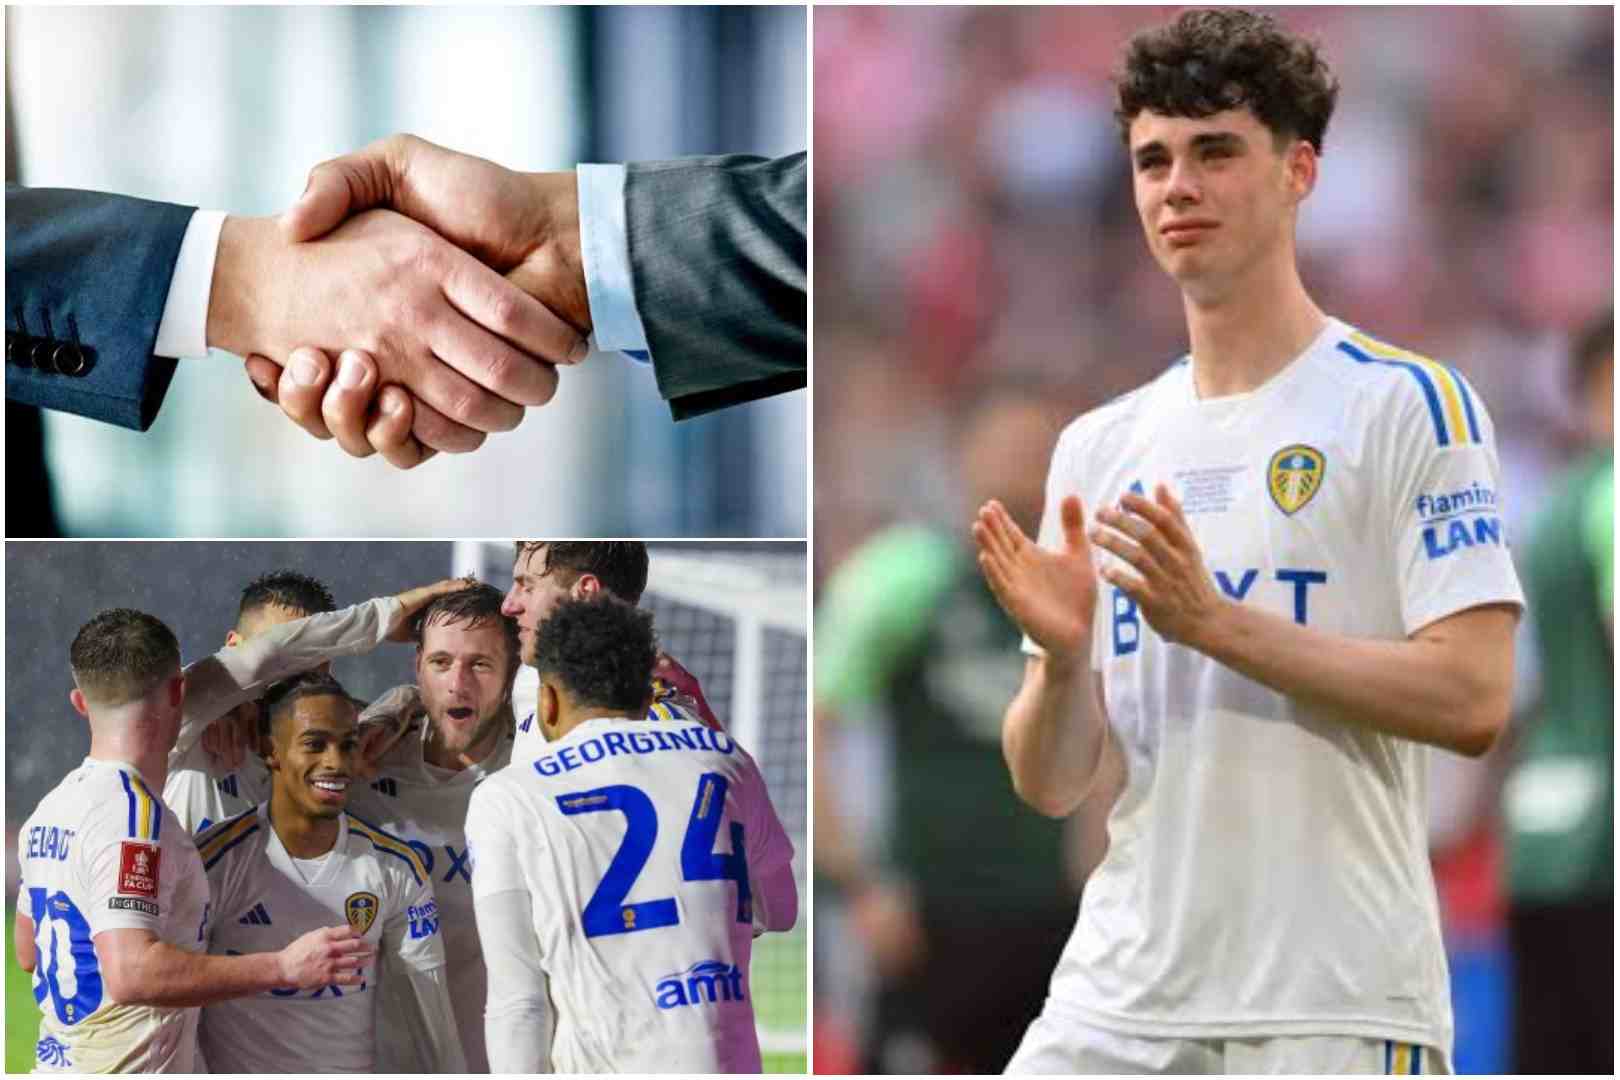 BAD NEWS – Leeds United have LOST another midfielder as 28-year old star AGREES Personal Terms with Diego Llorente’s former club on summer move away from the Championship for Top flight football just like Archie Gray